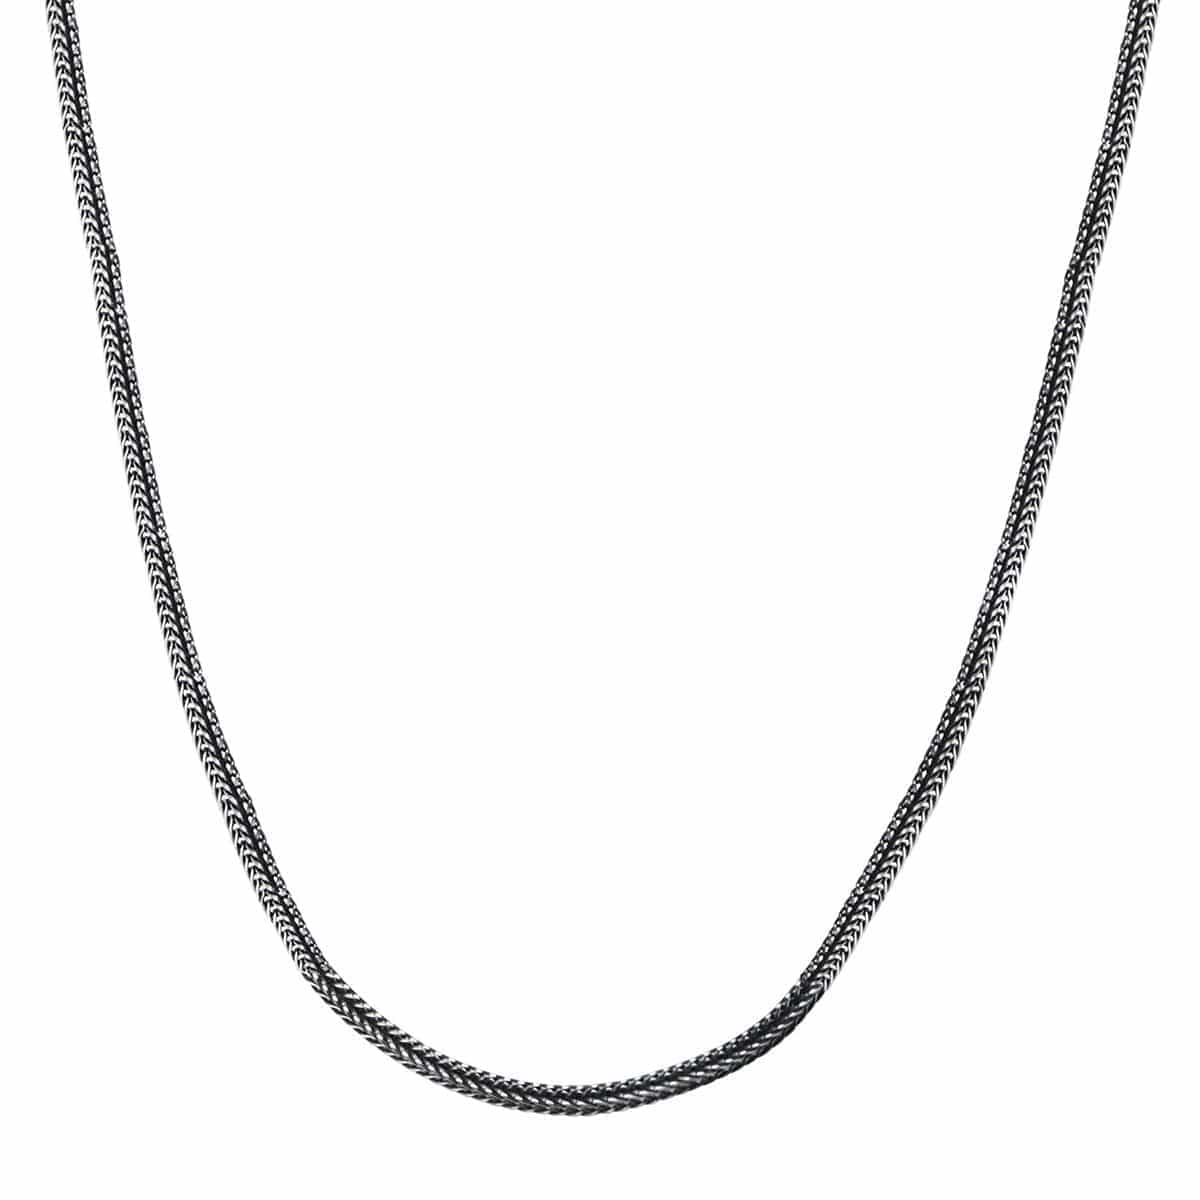 INOX JEWELRY Chains Antiqued Silver Tone Stainless Steel 3mm Thin Wheat Chain NSTC9233-20